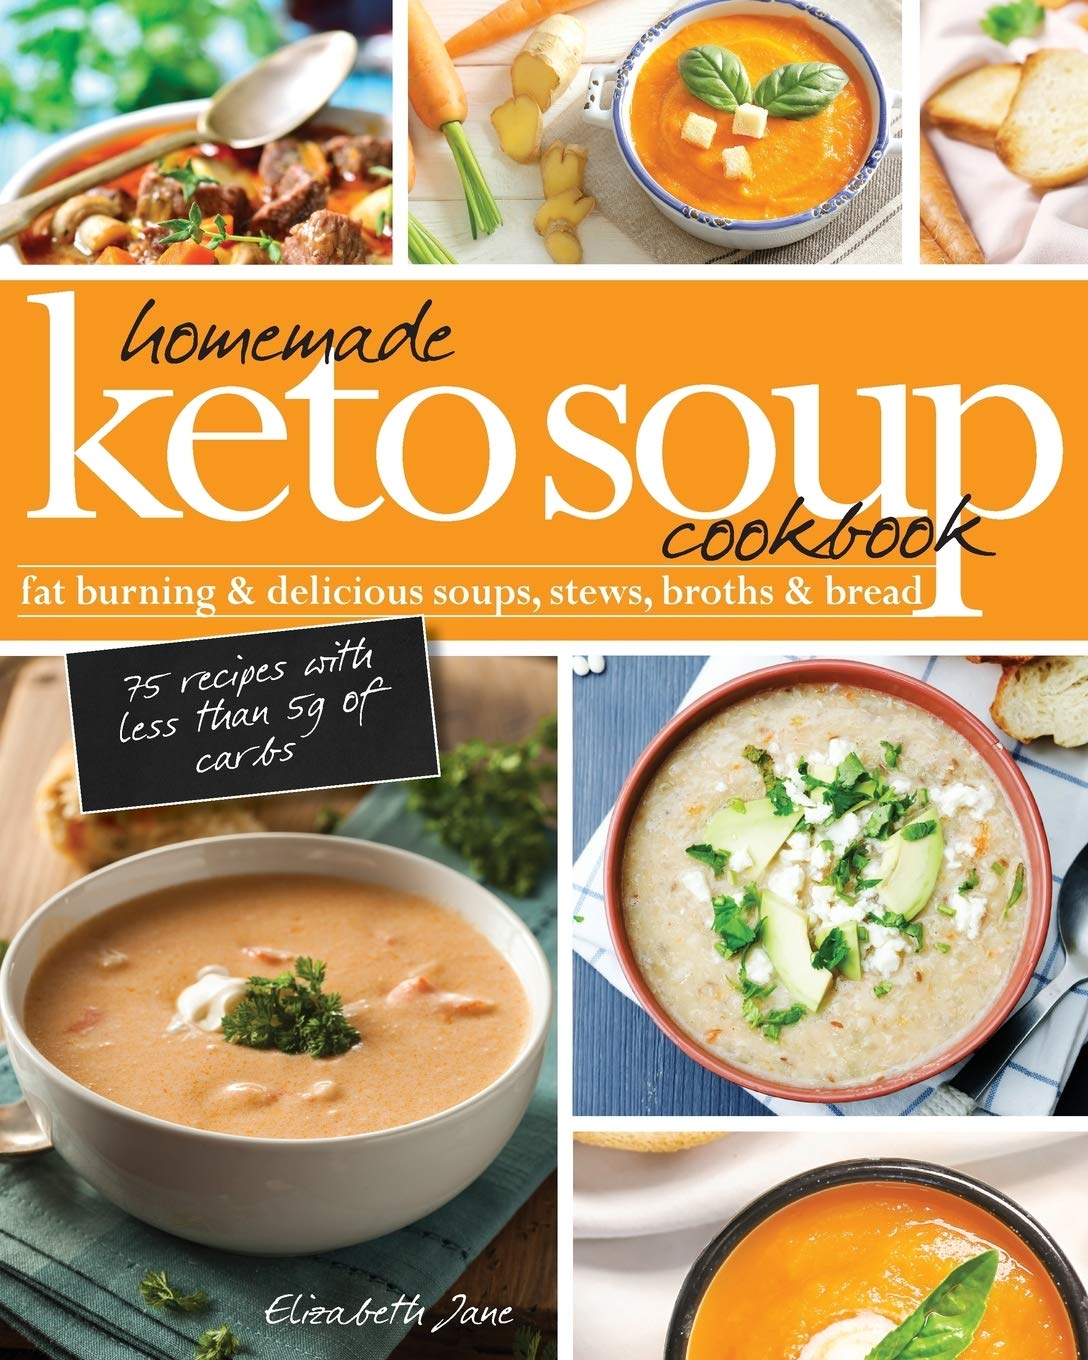 Book Cover Homemade Keto Soup Cookbook: Fat Burning & Delicious Soups, Stews, Broths & Bread.